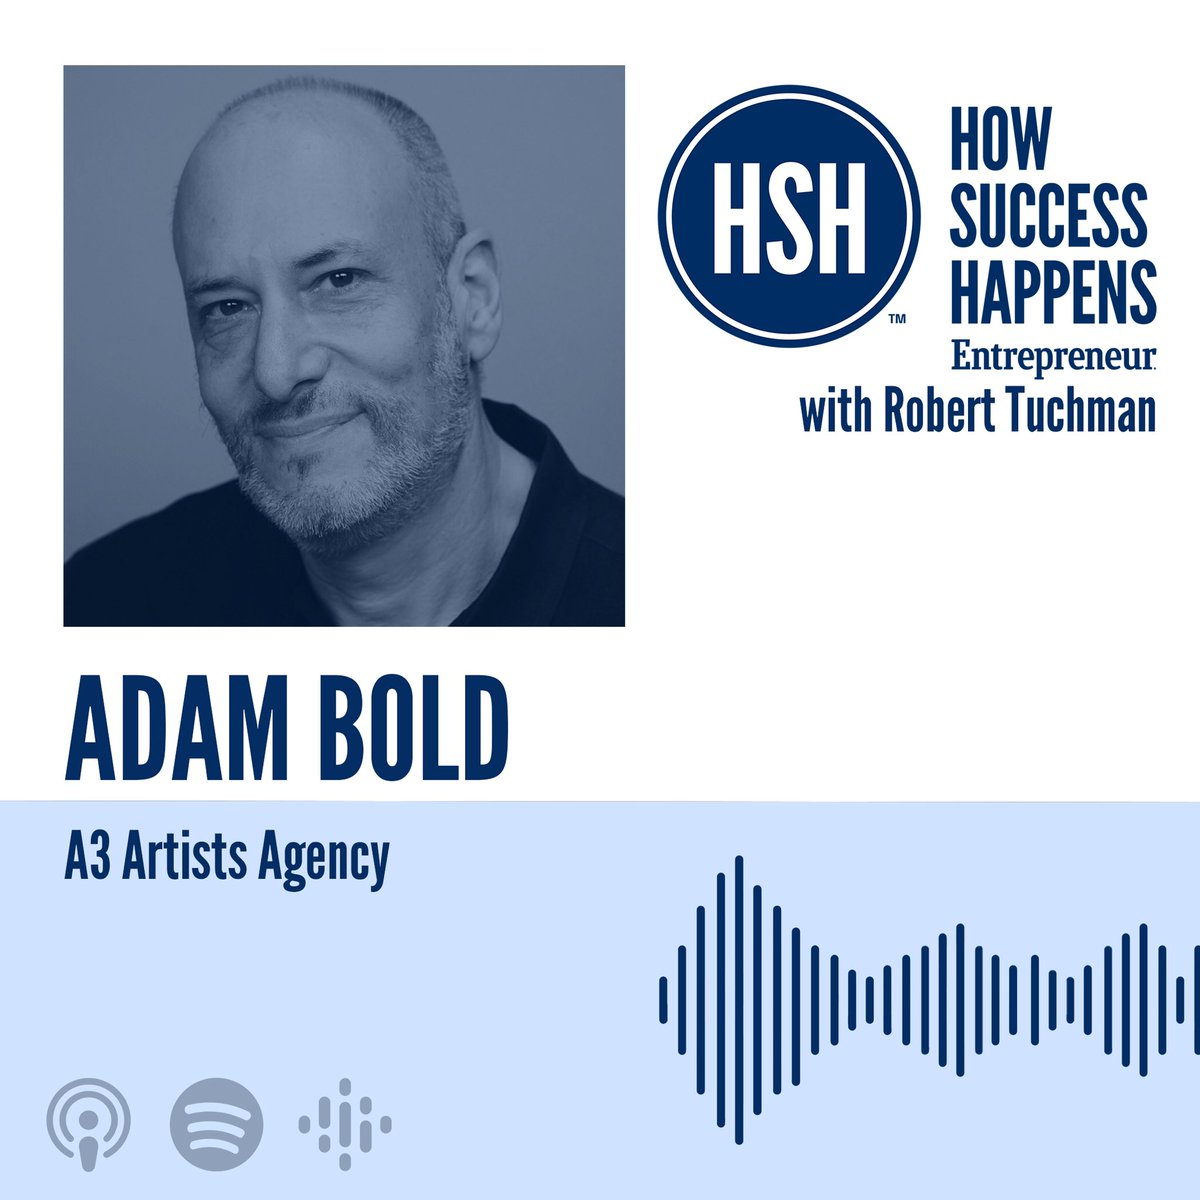 This weeks new How Success Happens episode is out now with @AdamBoldLA chairman of @A3ArtistsAgency on changing the culture of talent agencies!
@Entrepreneur @roberttuchman @AmazeMediaLabs 

#entrepreneur #entertainment #howsuccesshappens #business